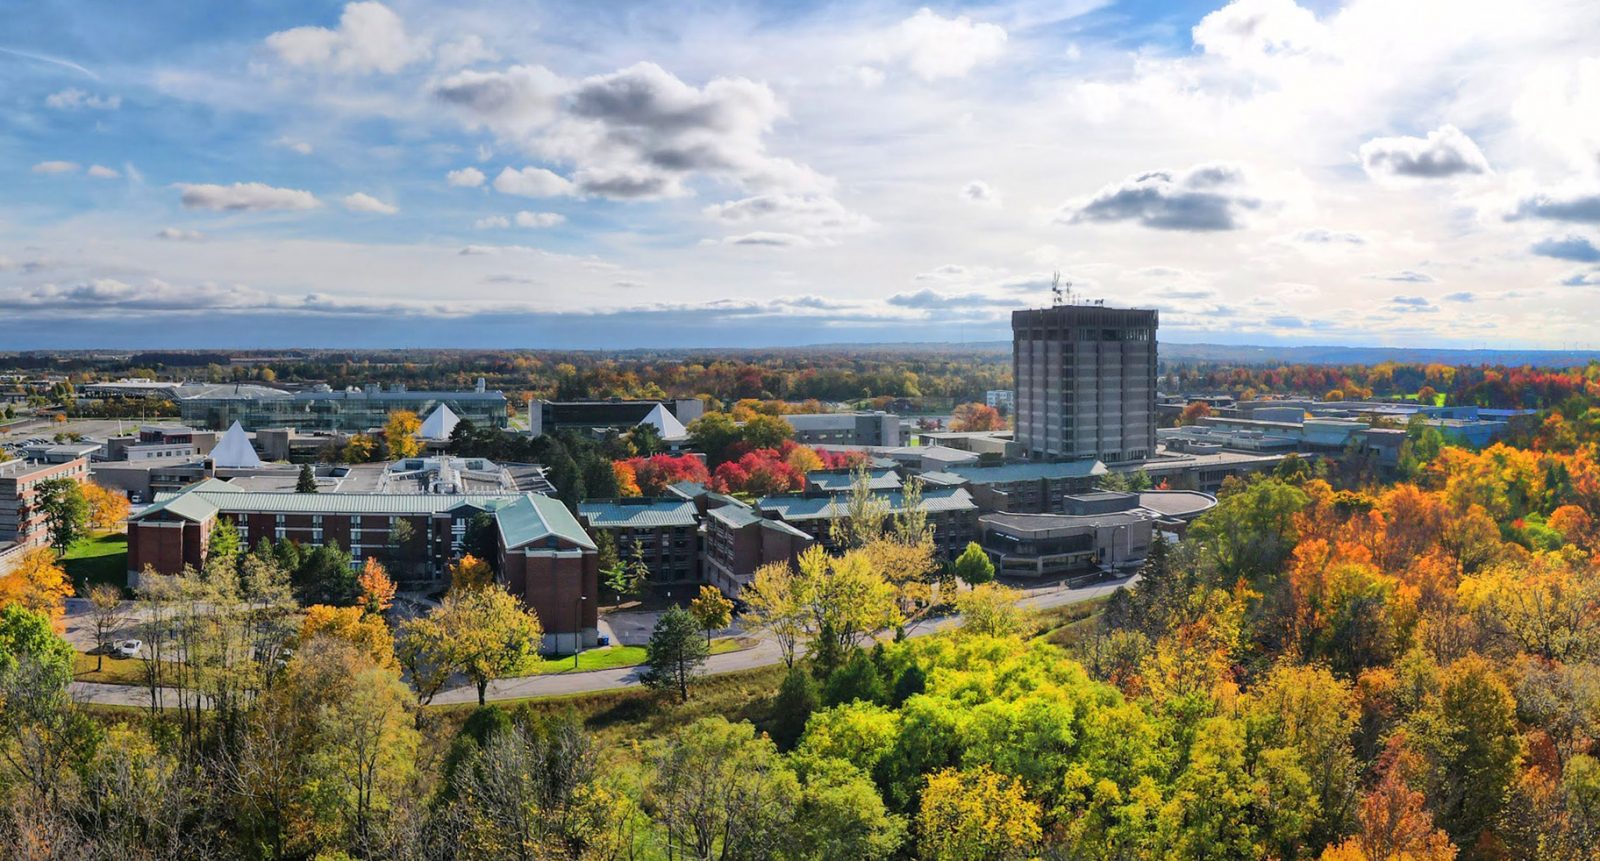 Brock campus buildings are shown in the fall